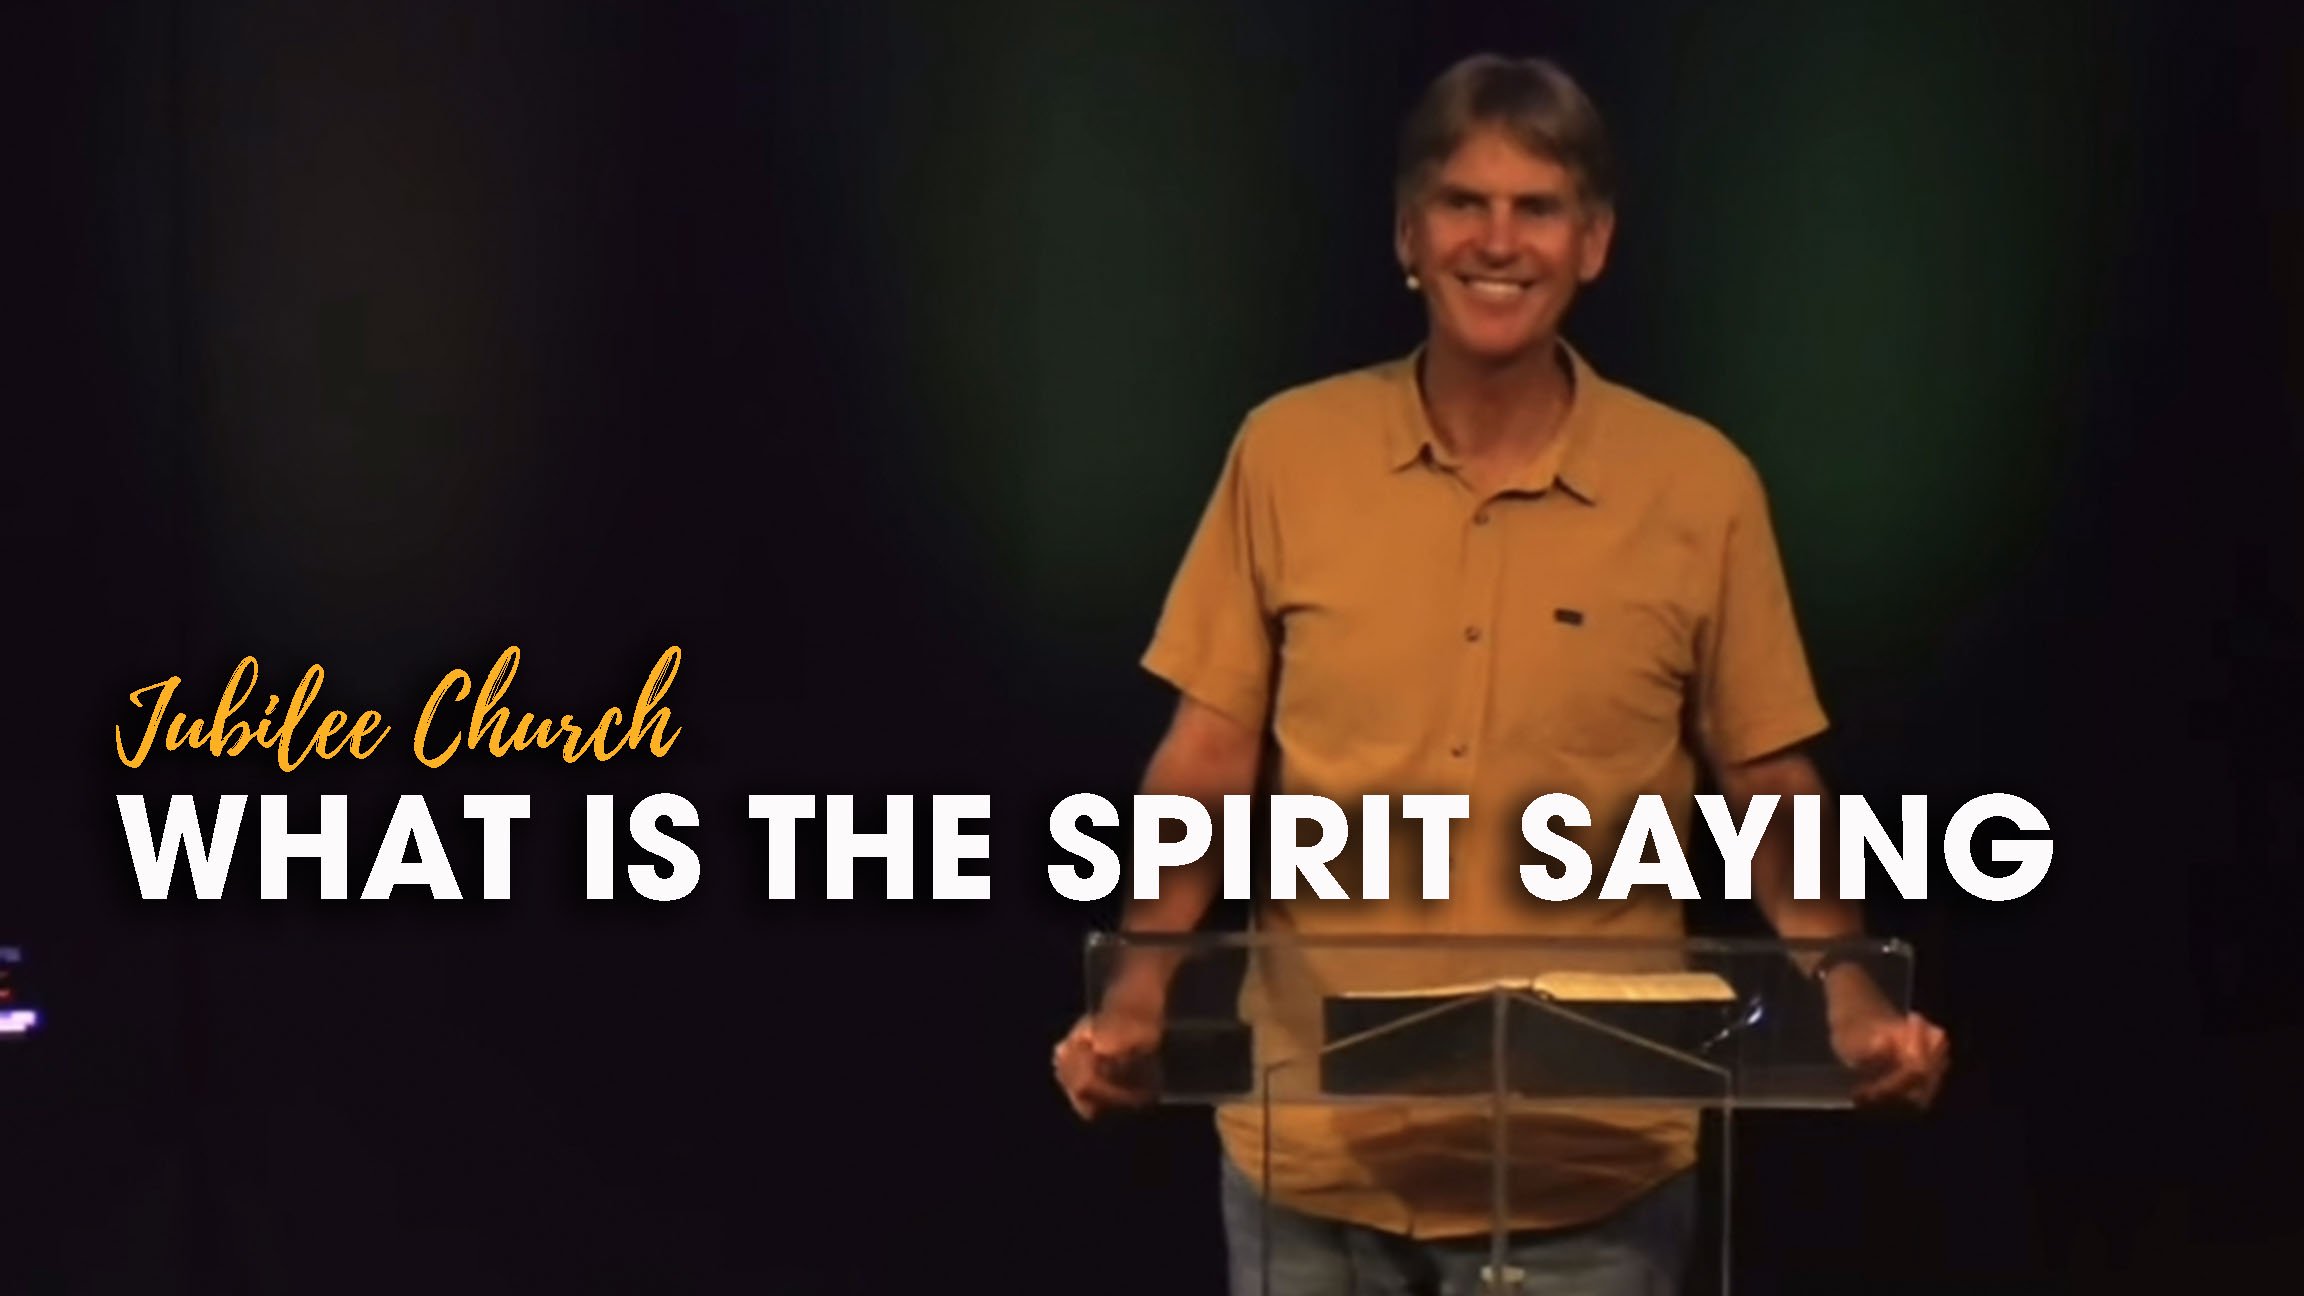 What is the Spirit Saying?